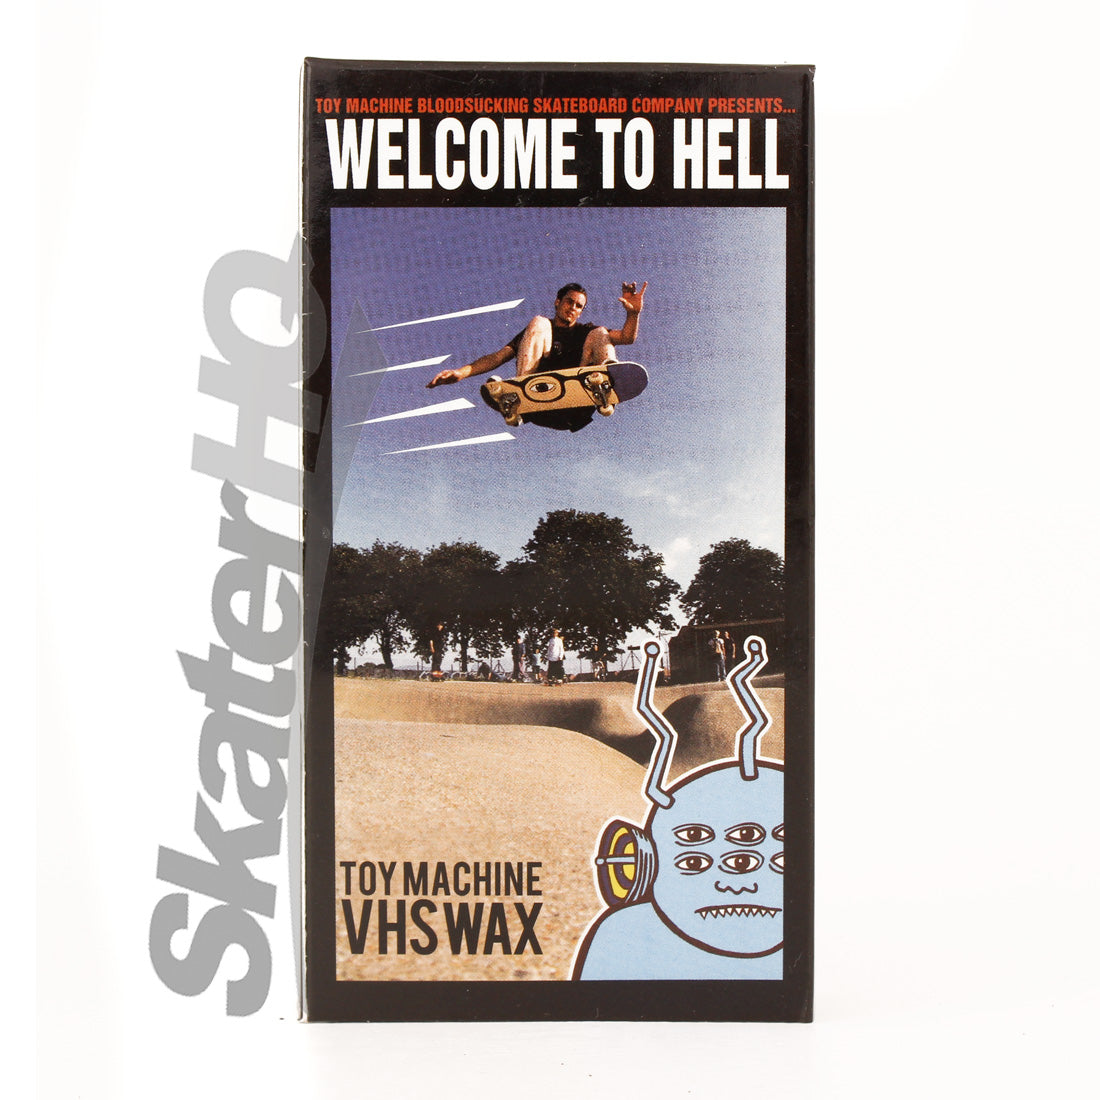 Toy Machine Welcome to Hell VHS Wax - Black Skateboard Accessories